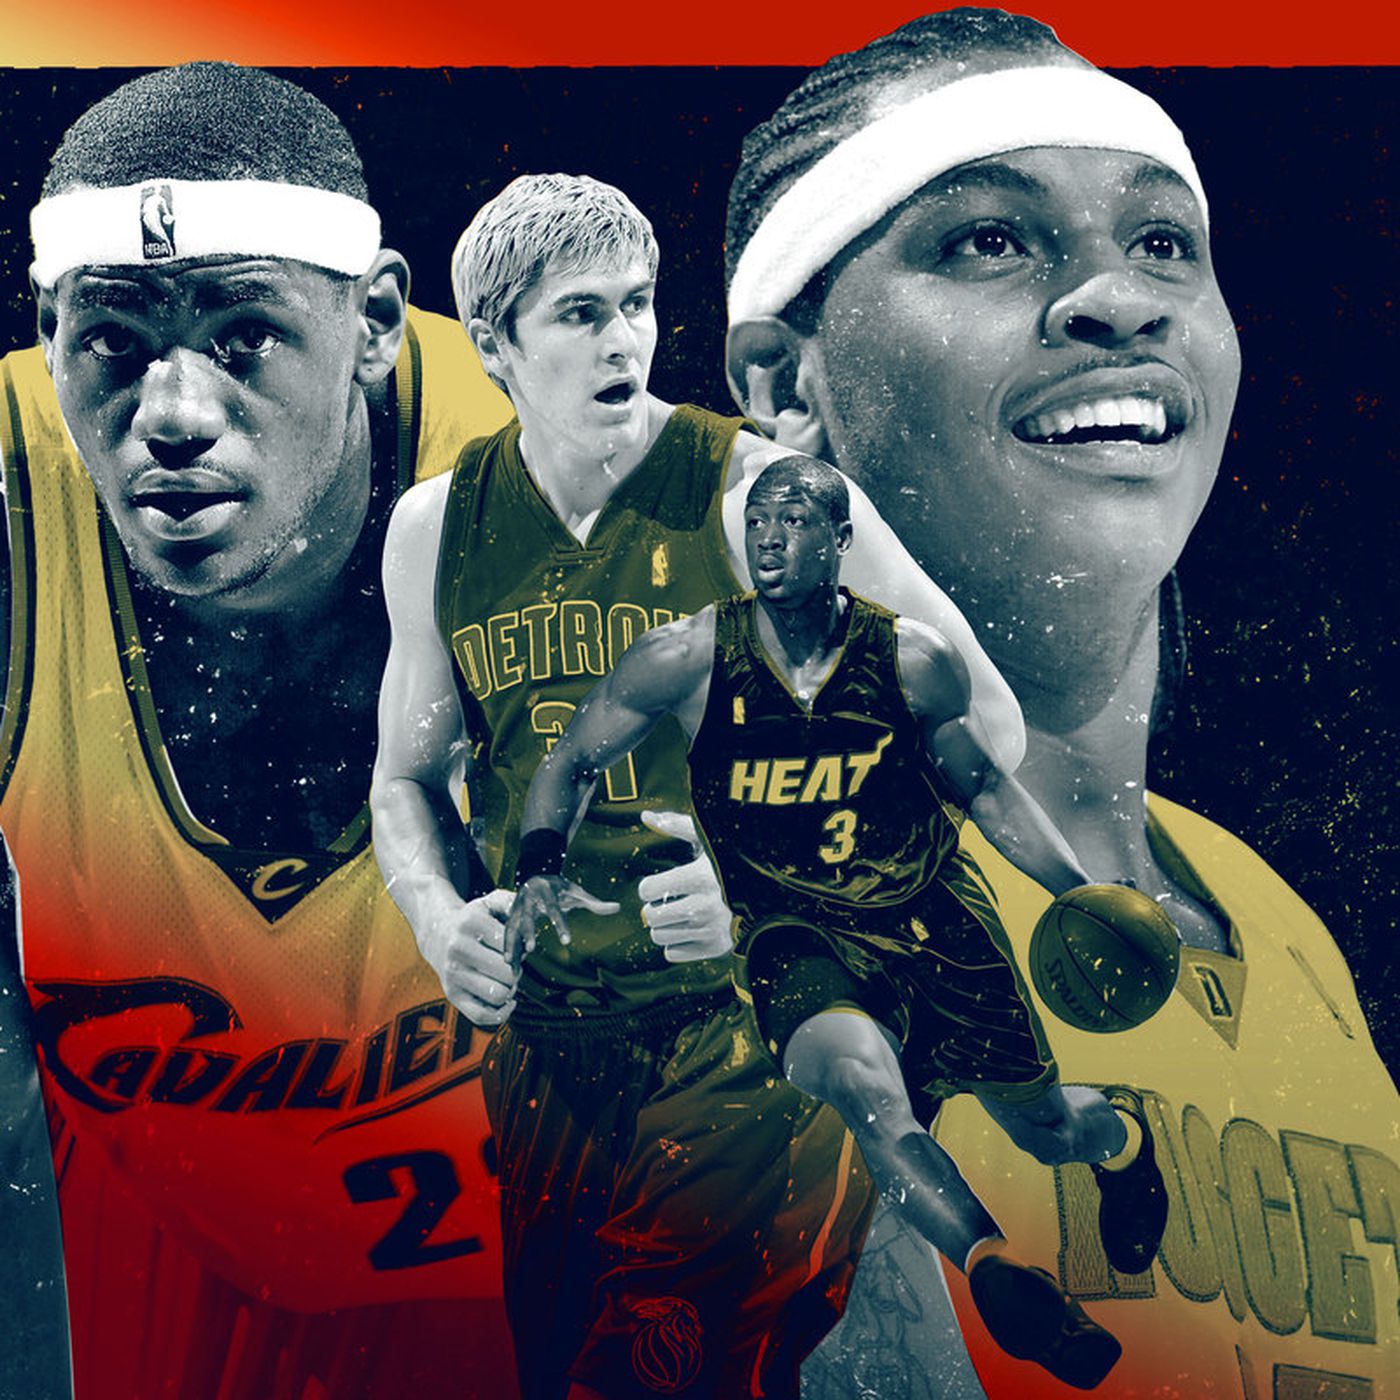 LeBron James and Carmelo Anthony through the years: From the historic 2003  NBA Draft to Lakers teammates